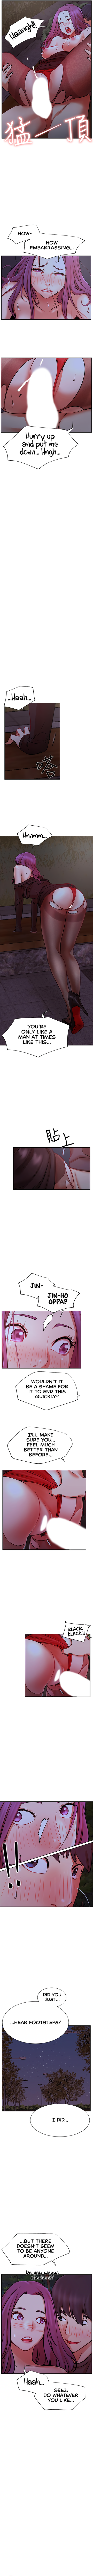 do-you-want-to-collab-chap-36-5